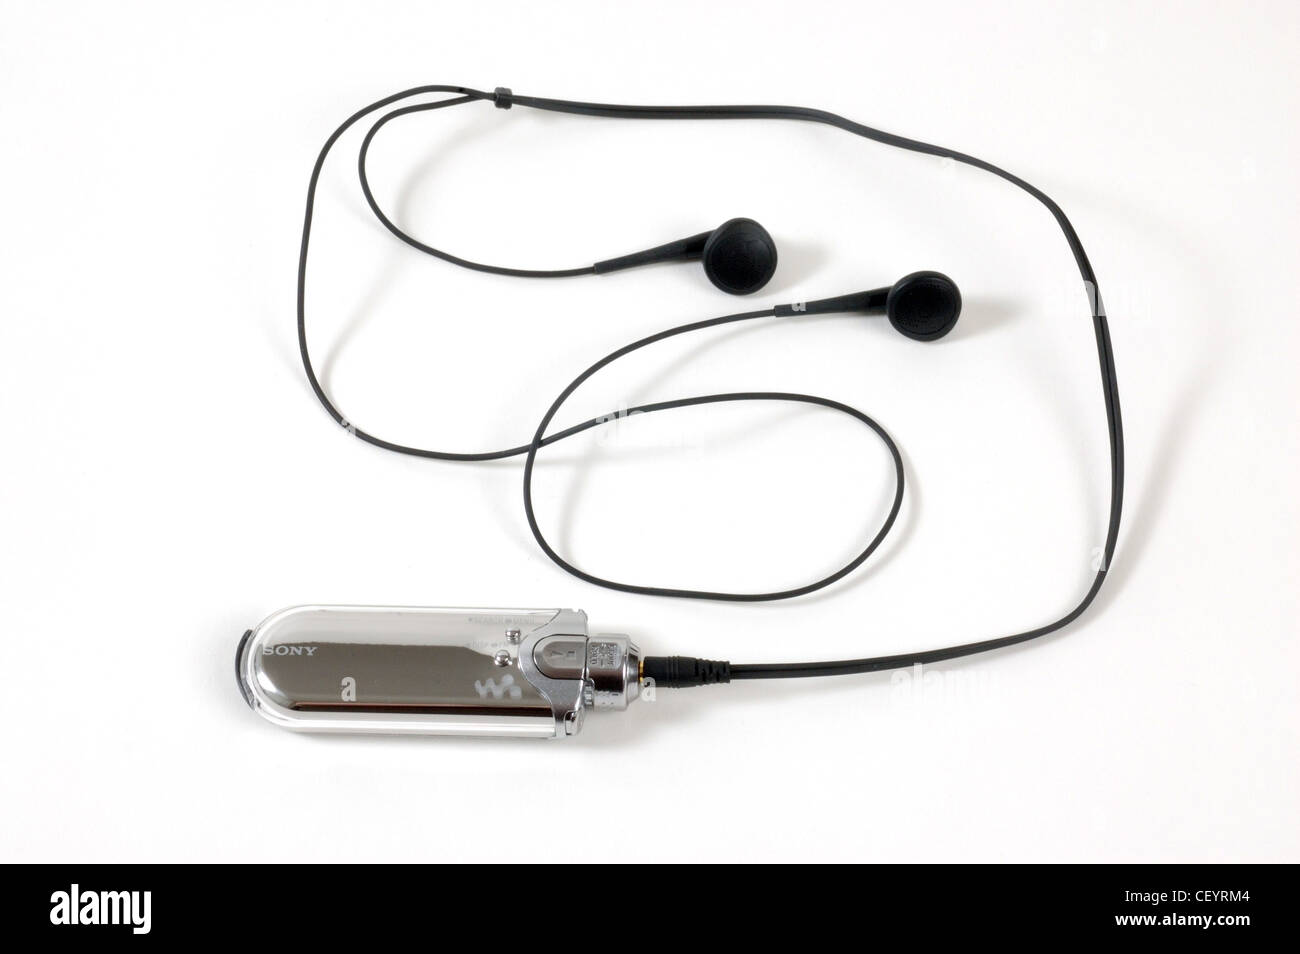 A small silver Sony MP3 player with in ear headphones attached Stock Photo  - Alamy